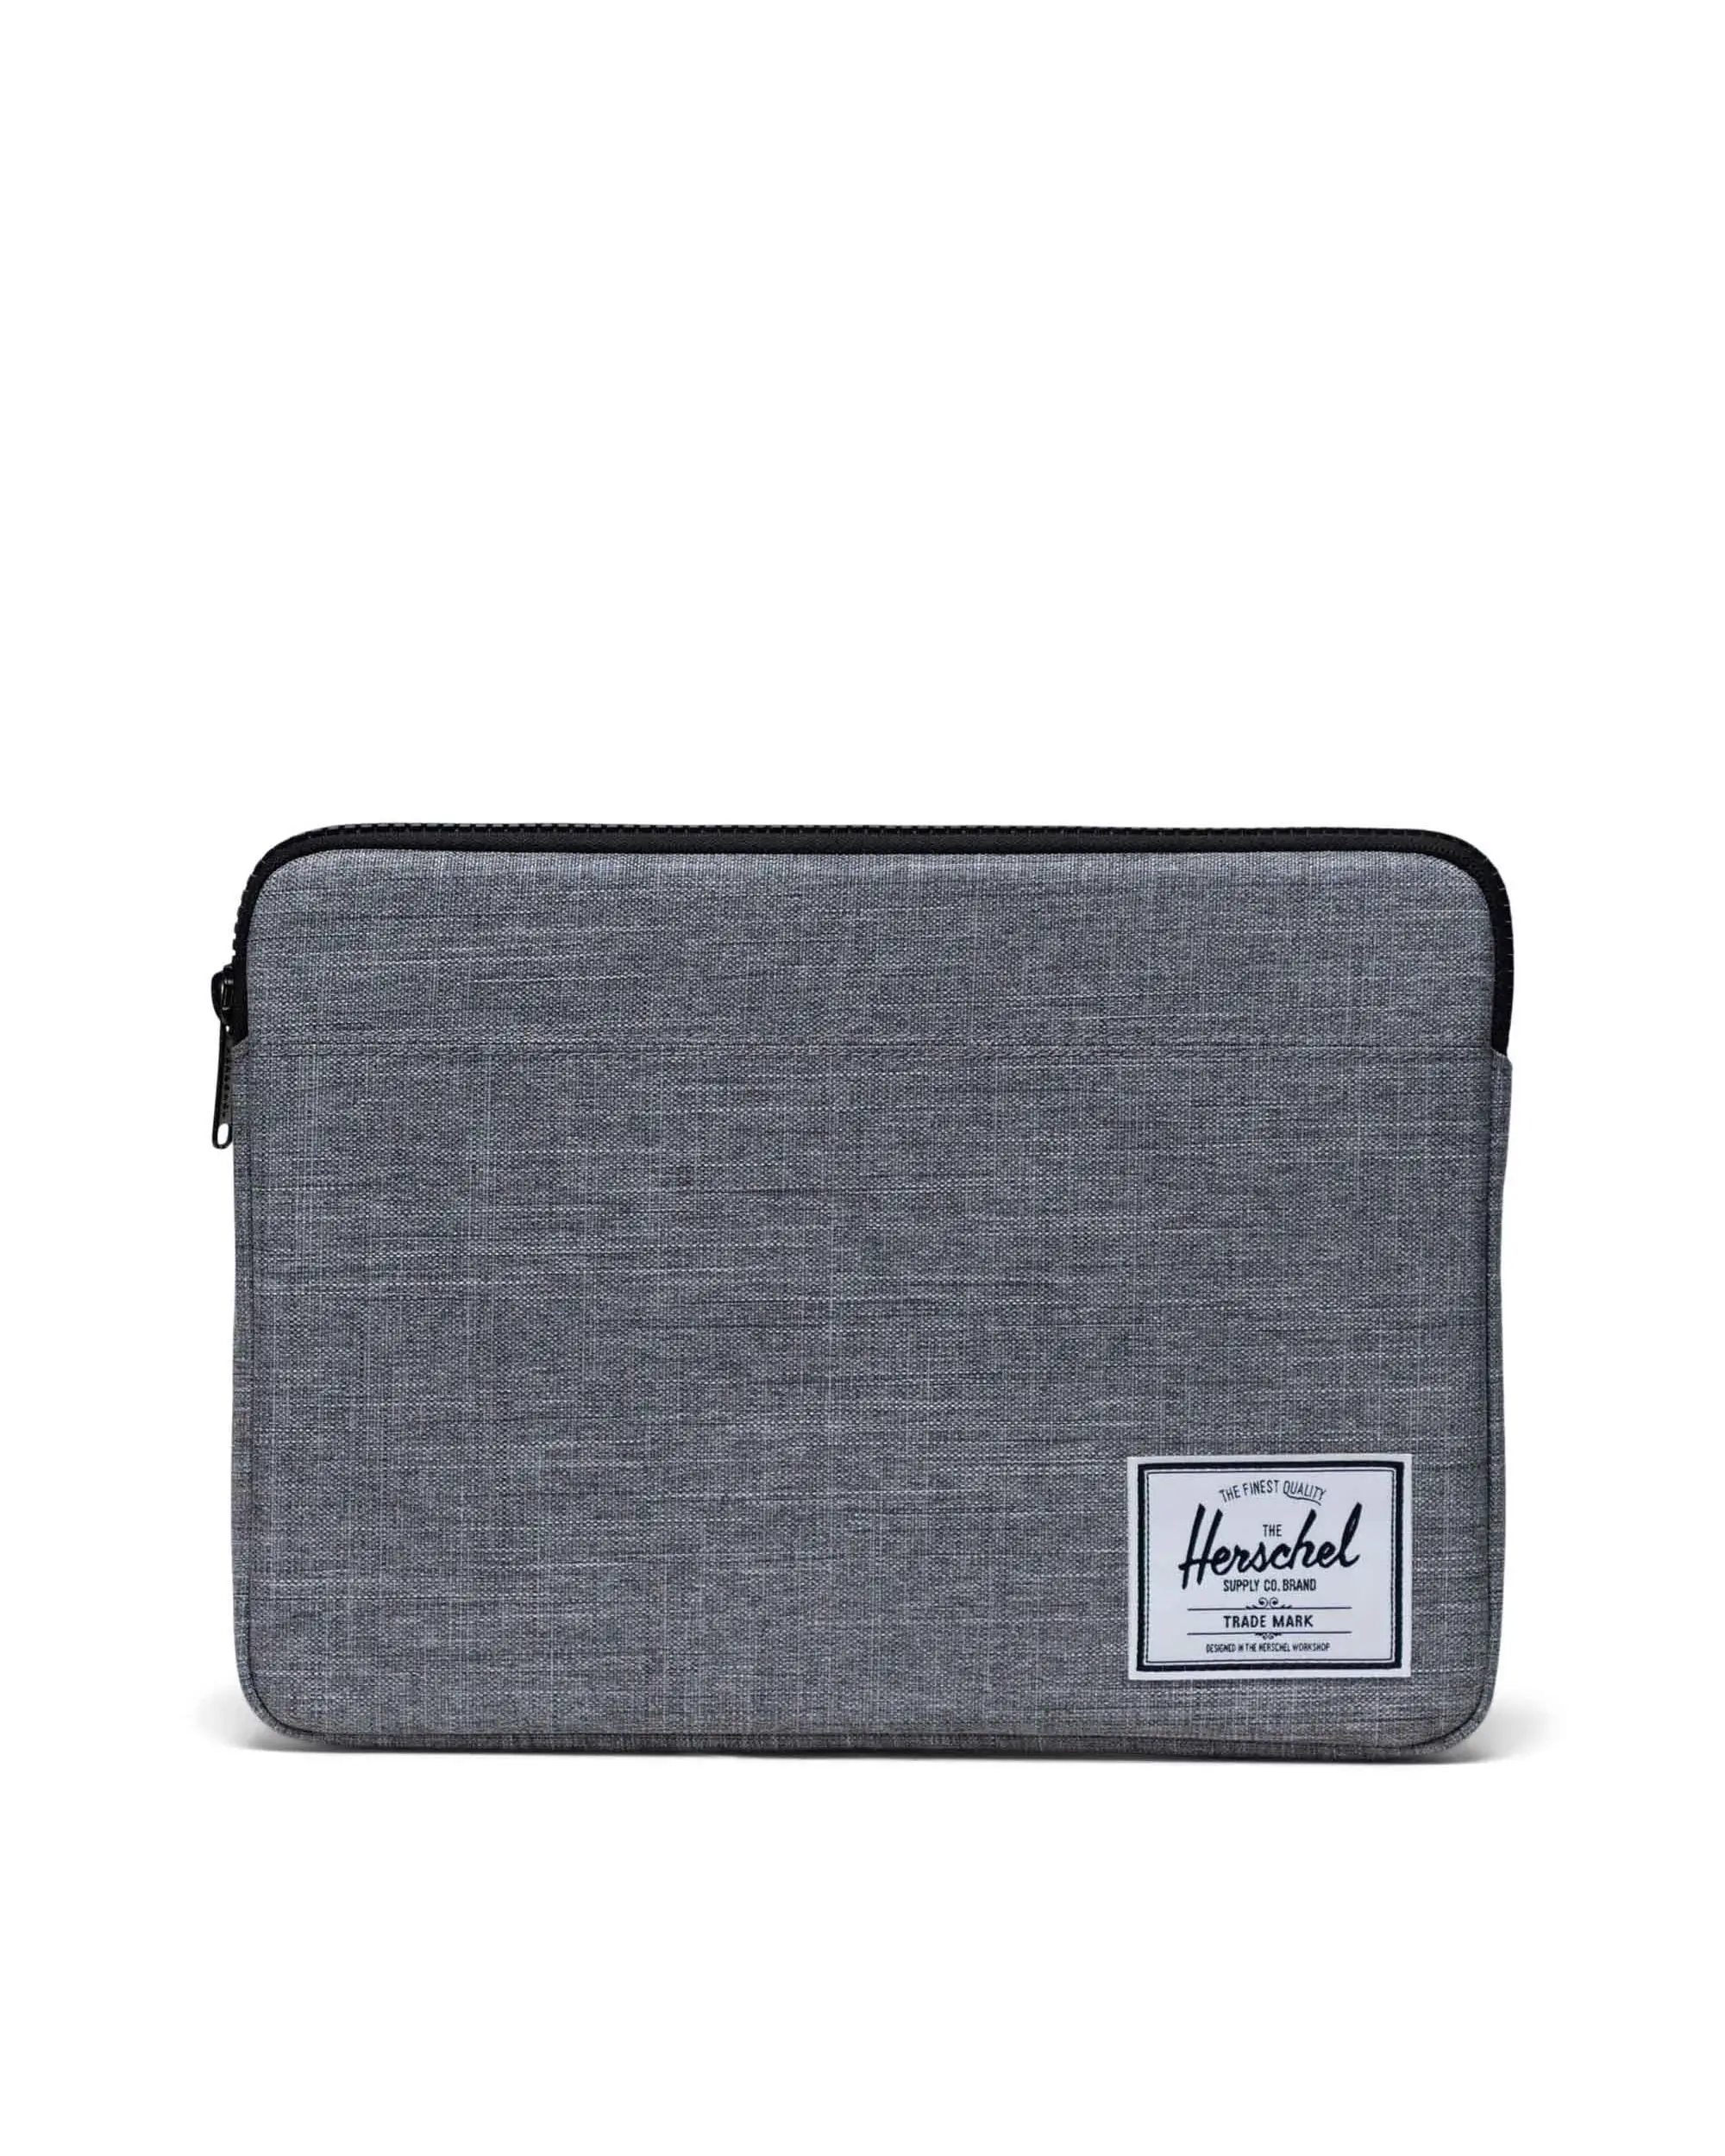 Herschel Supply Co Anchor 13 Inch Laptop Sleeve In Pink/Gray